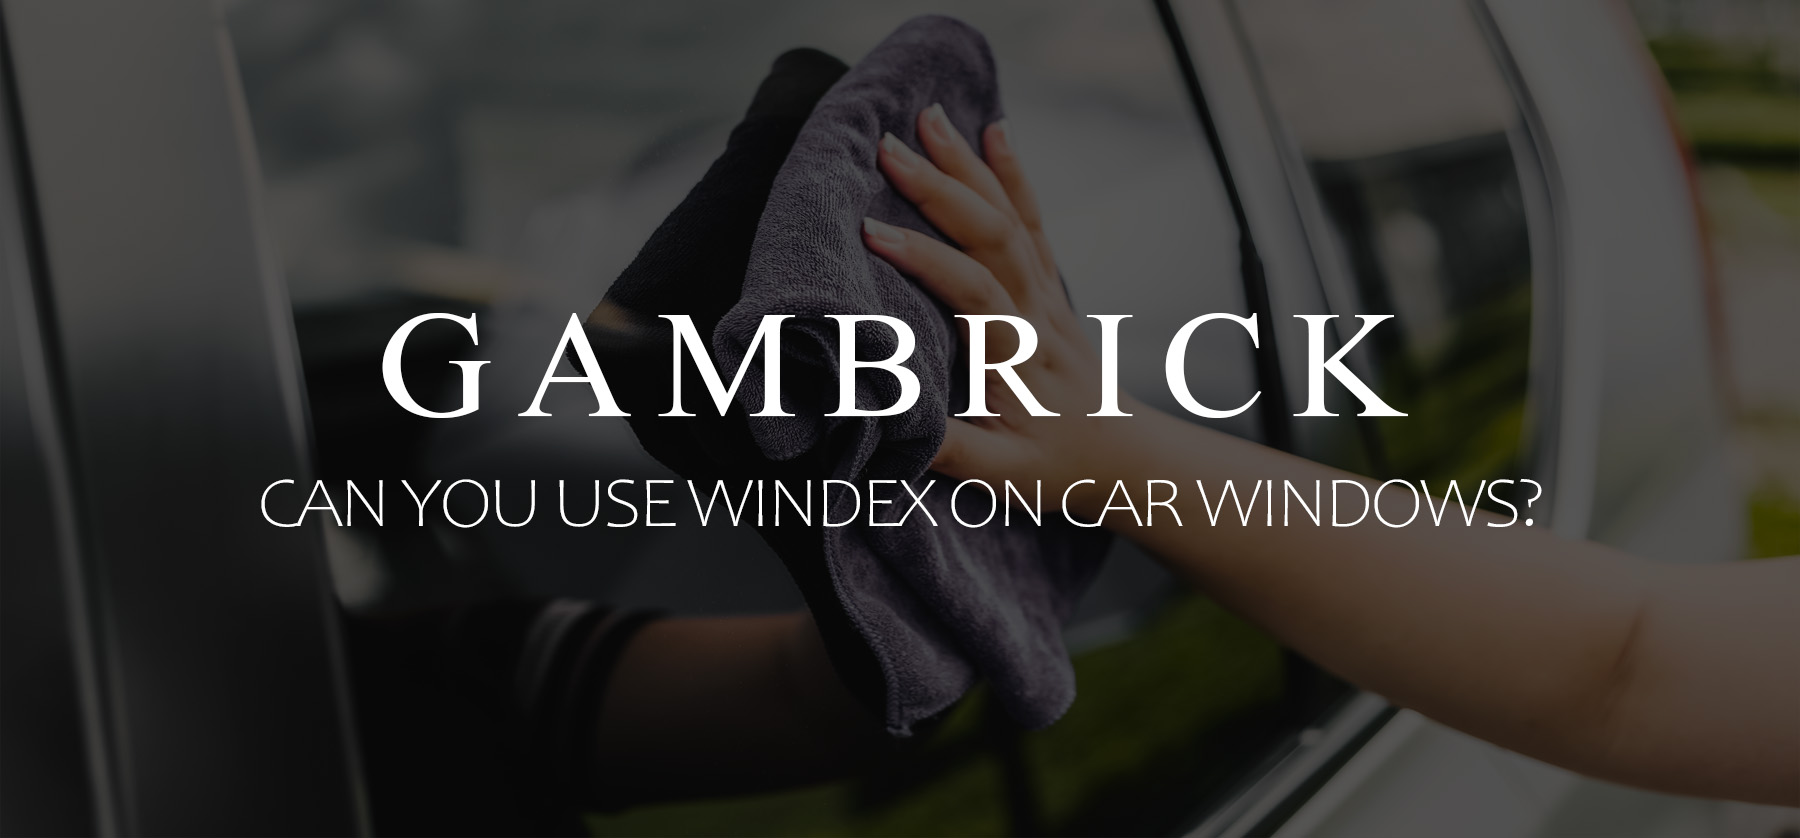 can you use Windex on car windows banner 1.1